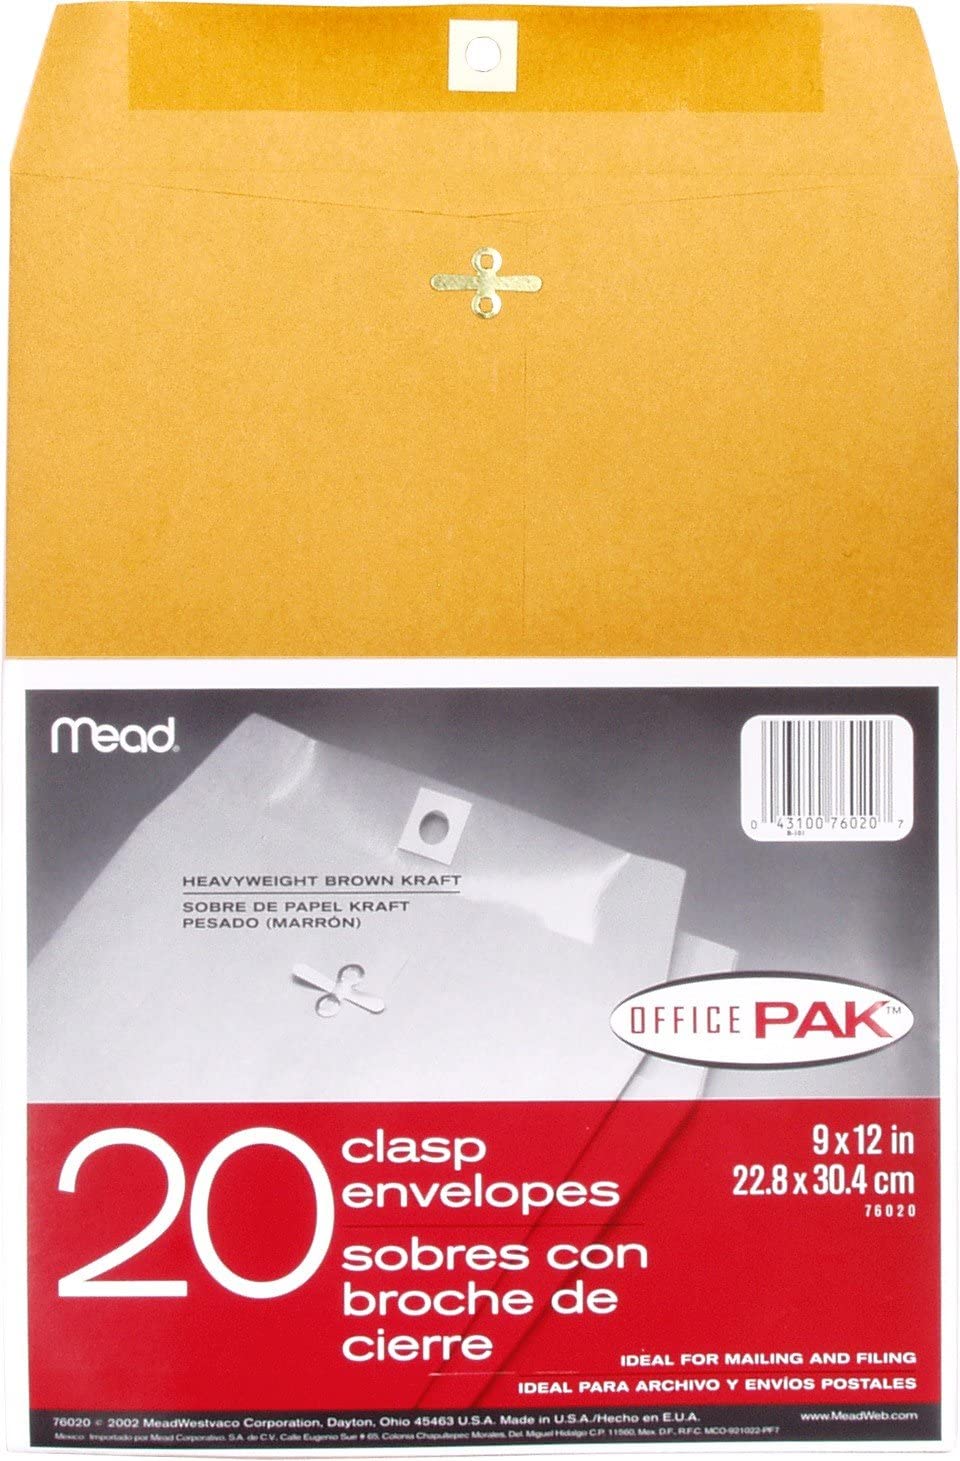 Mead Letter Size Mailing Envelopes Clasp Closure All-Purpose 24-lb Paper 9" X 12" Brown Kraft Material 20/Pack (76020)